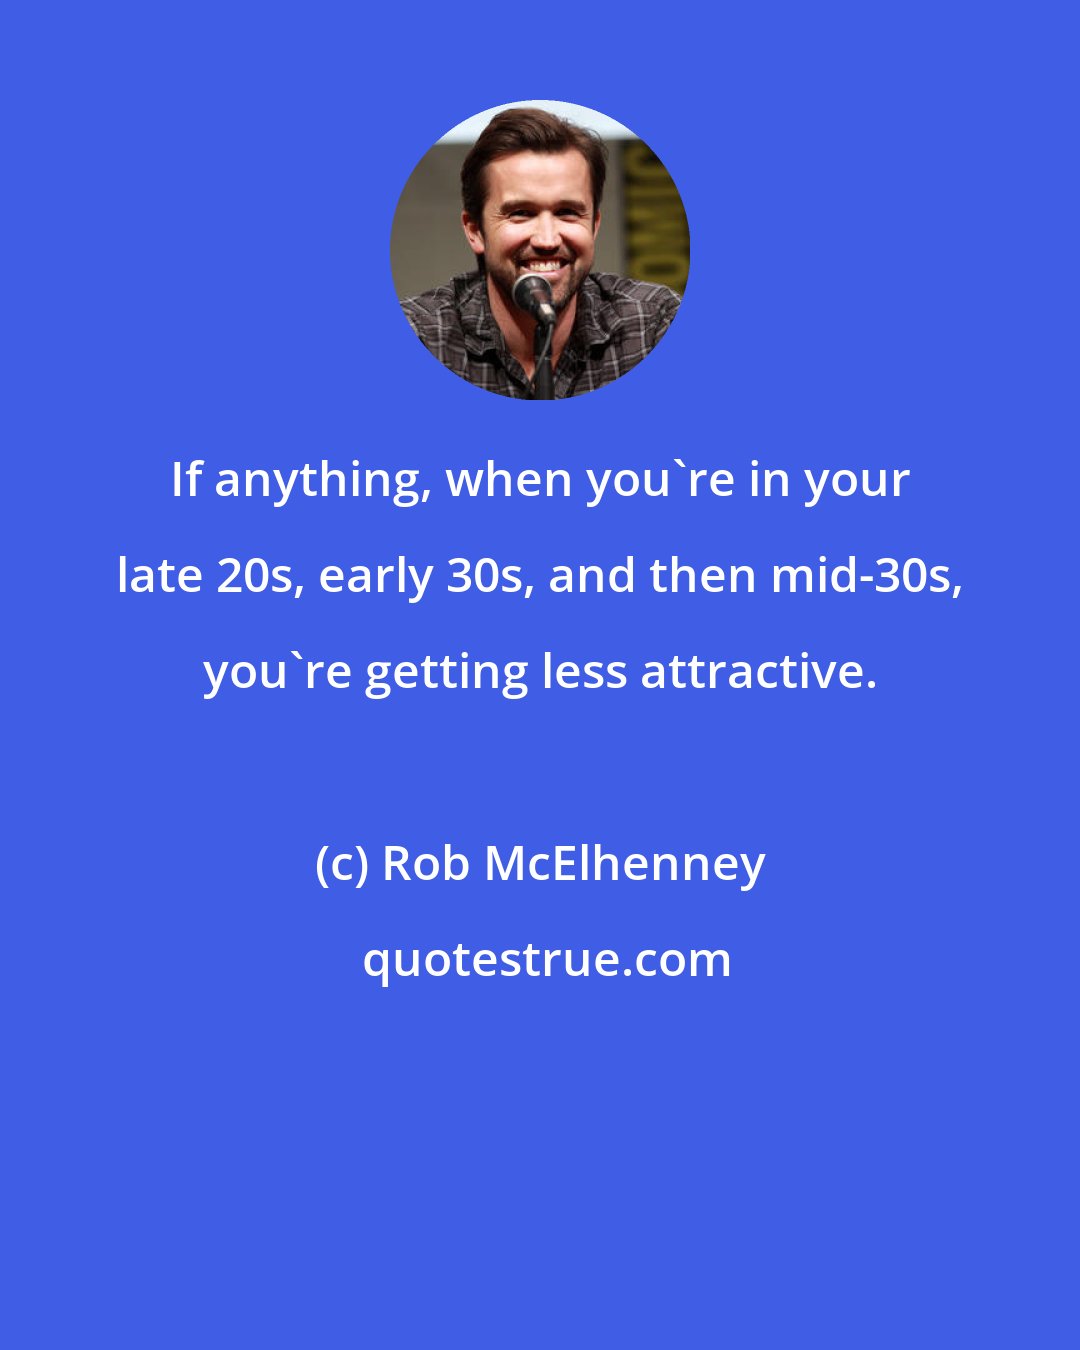 Rob McElhenney: If anything, when you're in your late 20s, early 30s, and then mid-30s, you're getting less attractive.